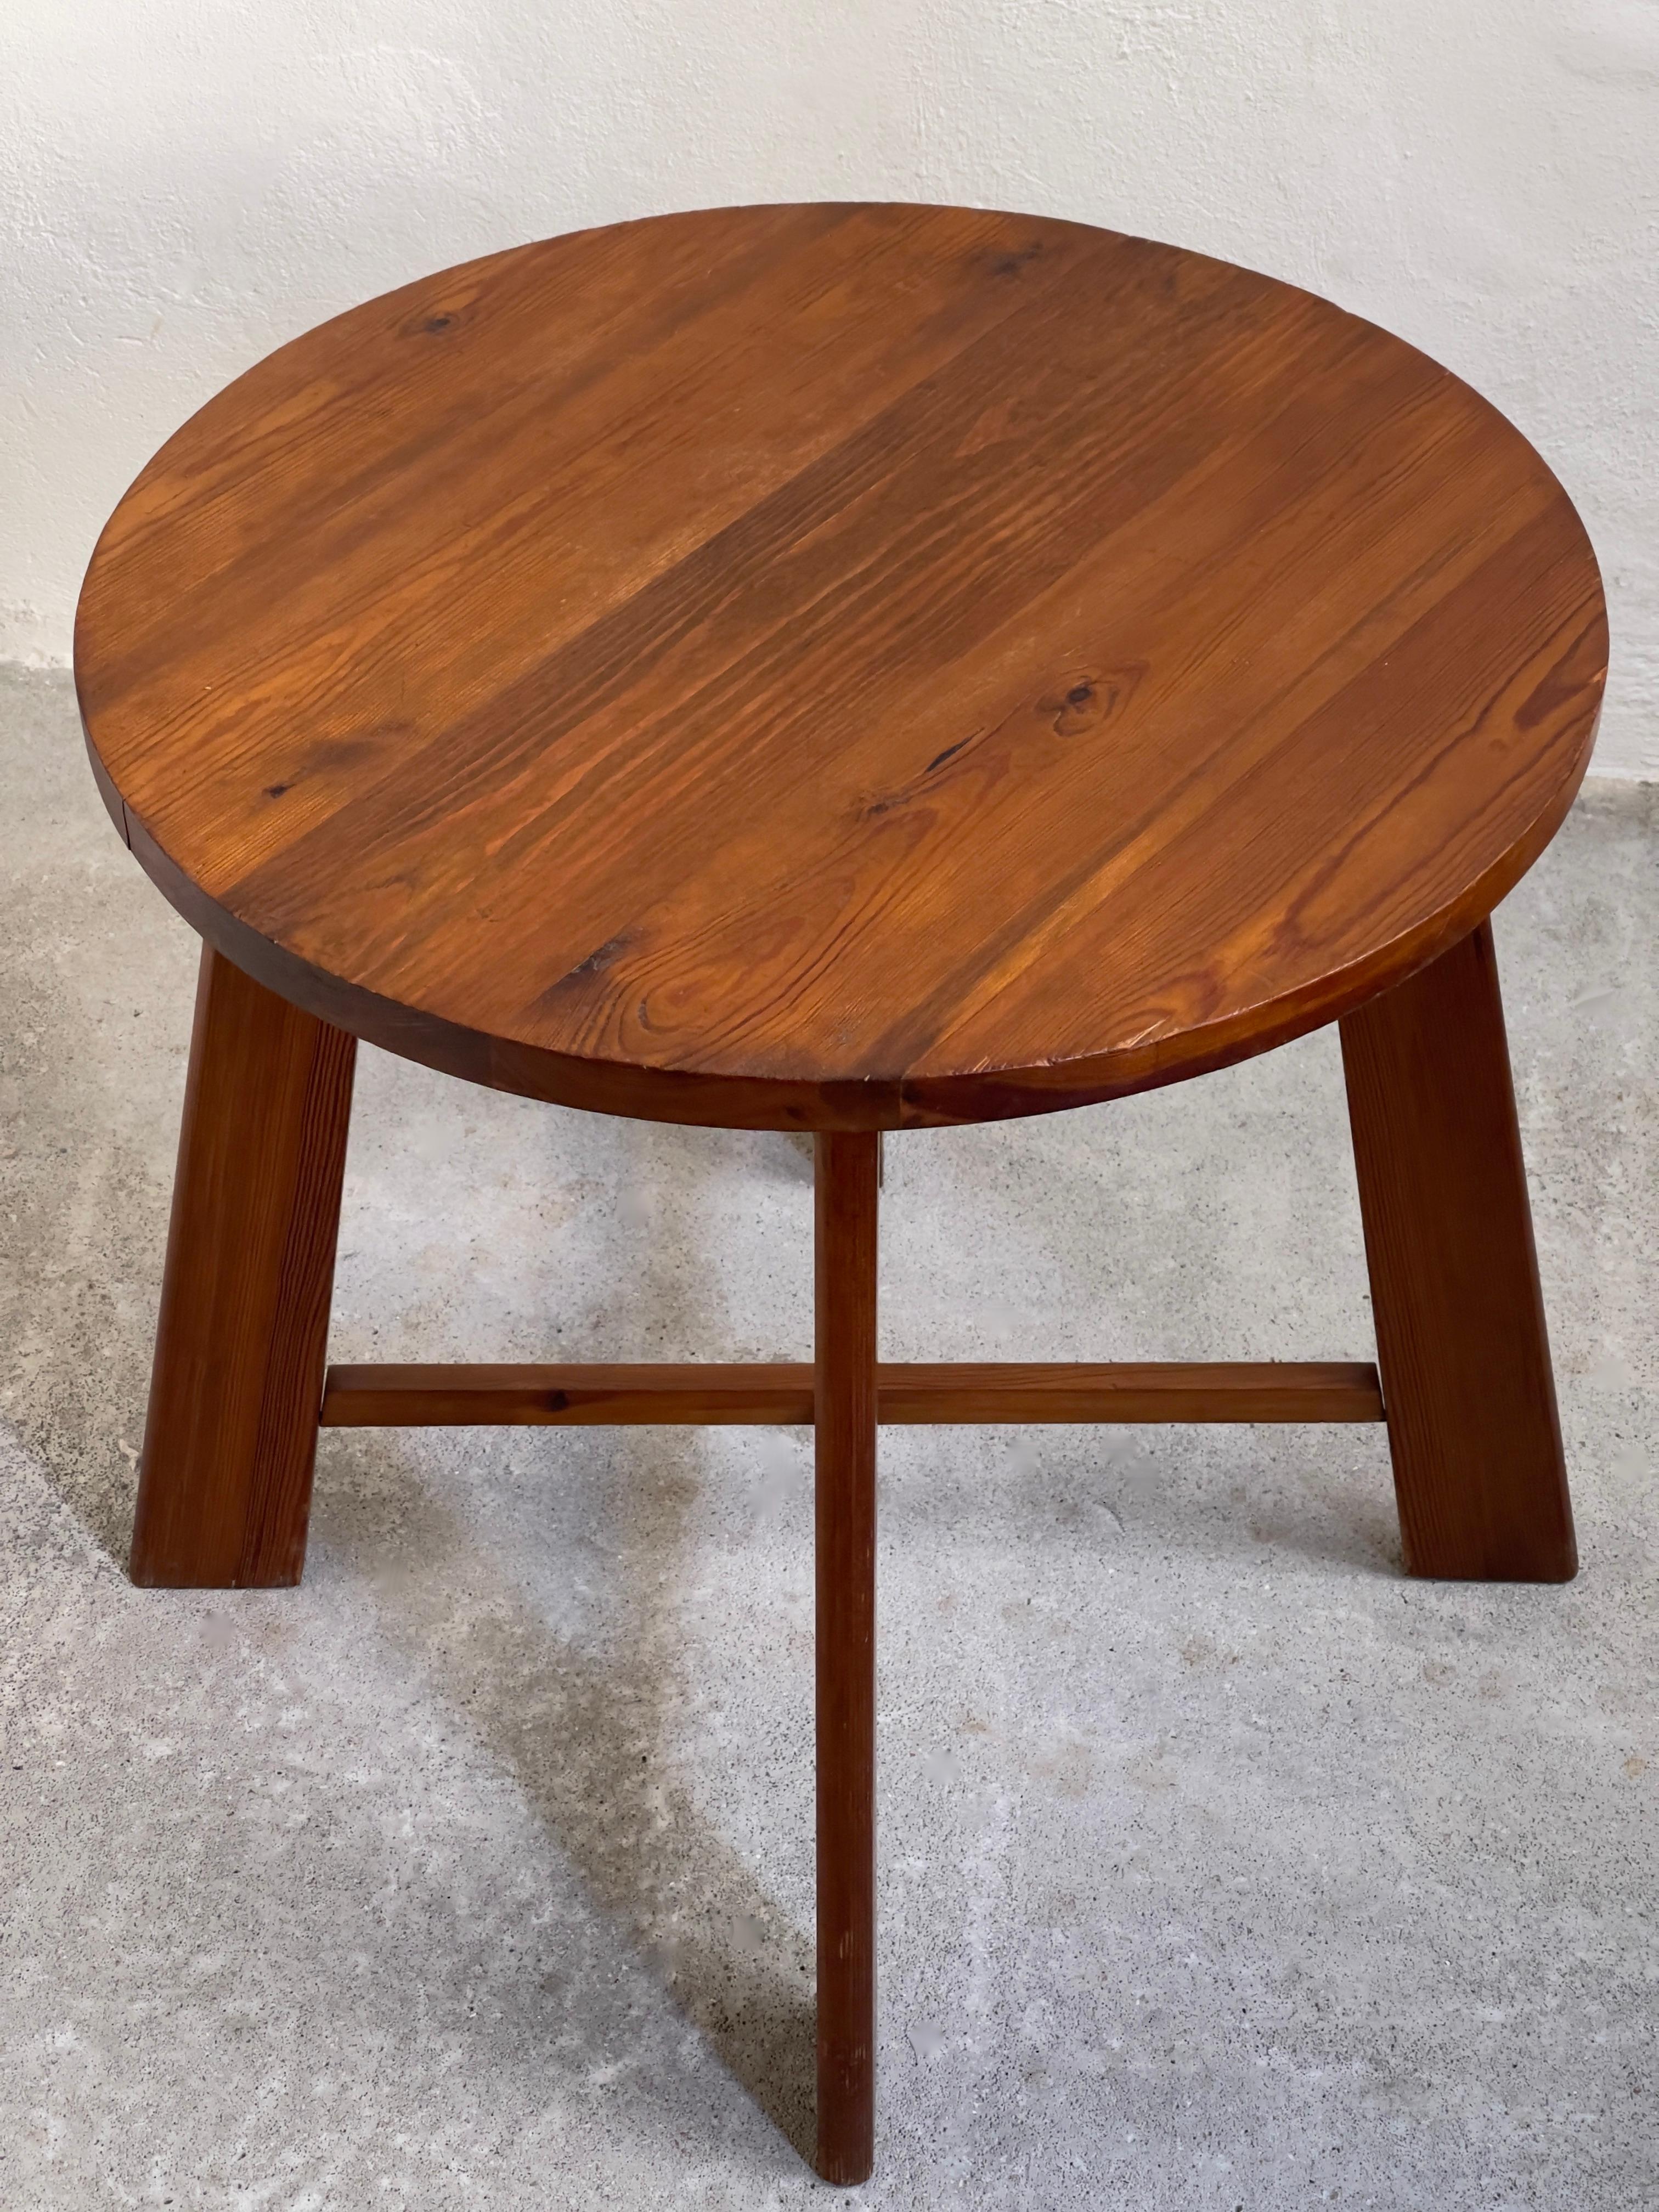 1930s Round Coffee Table in Deep Patinated Solid Pine from Danish Cabinet Maker For Sale 2